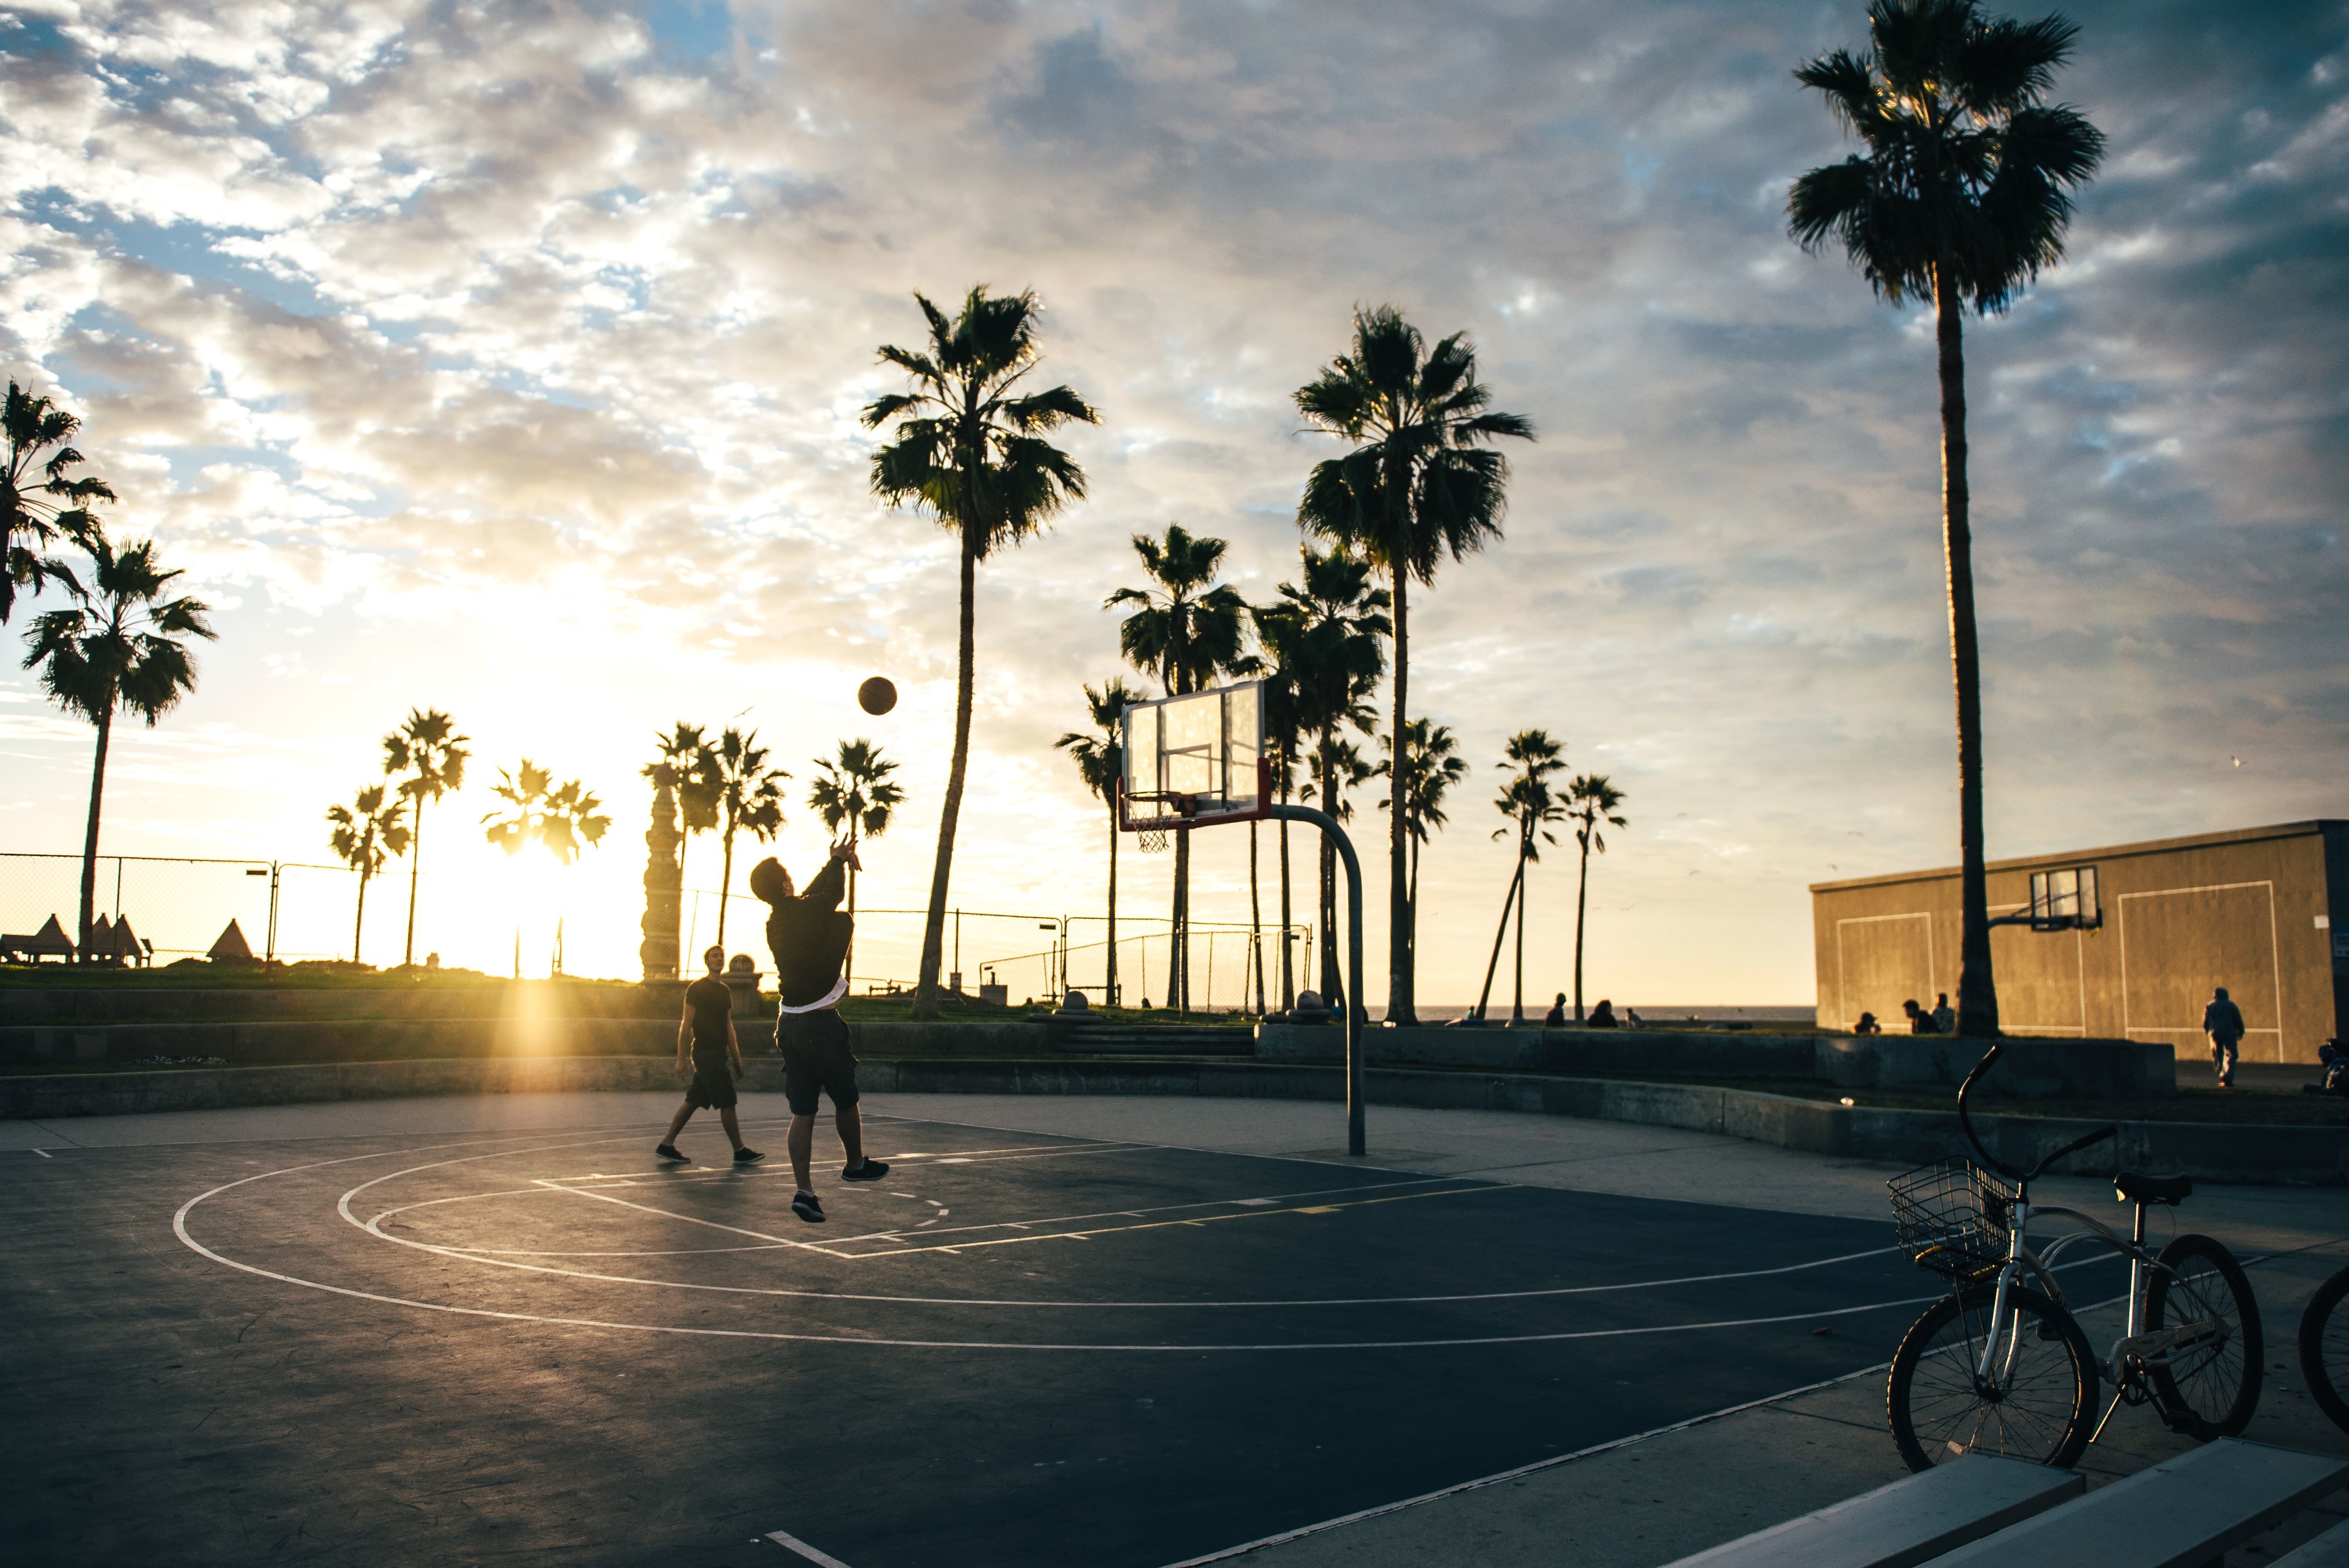 Free picture: basketball, beach, bicycle, fun, tropical, vacation